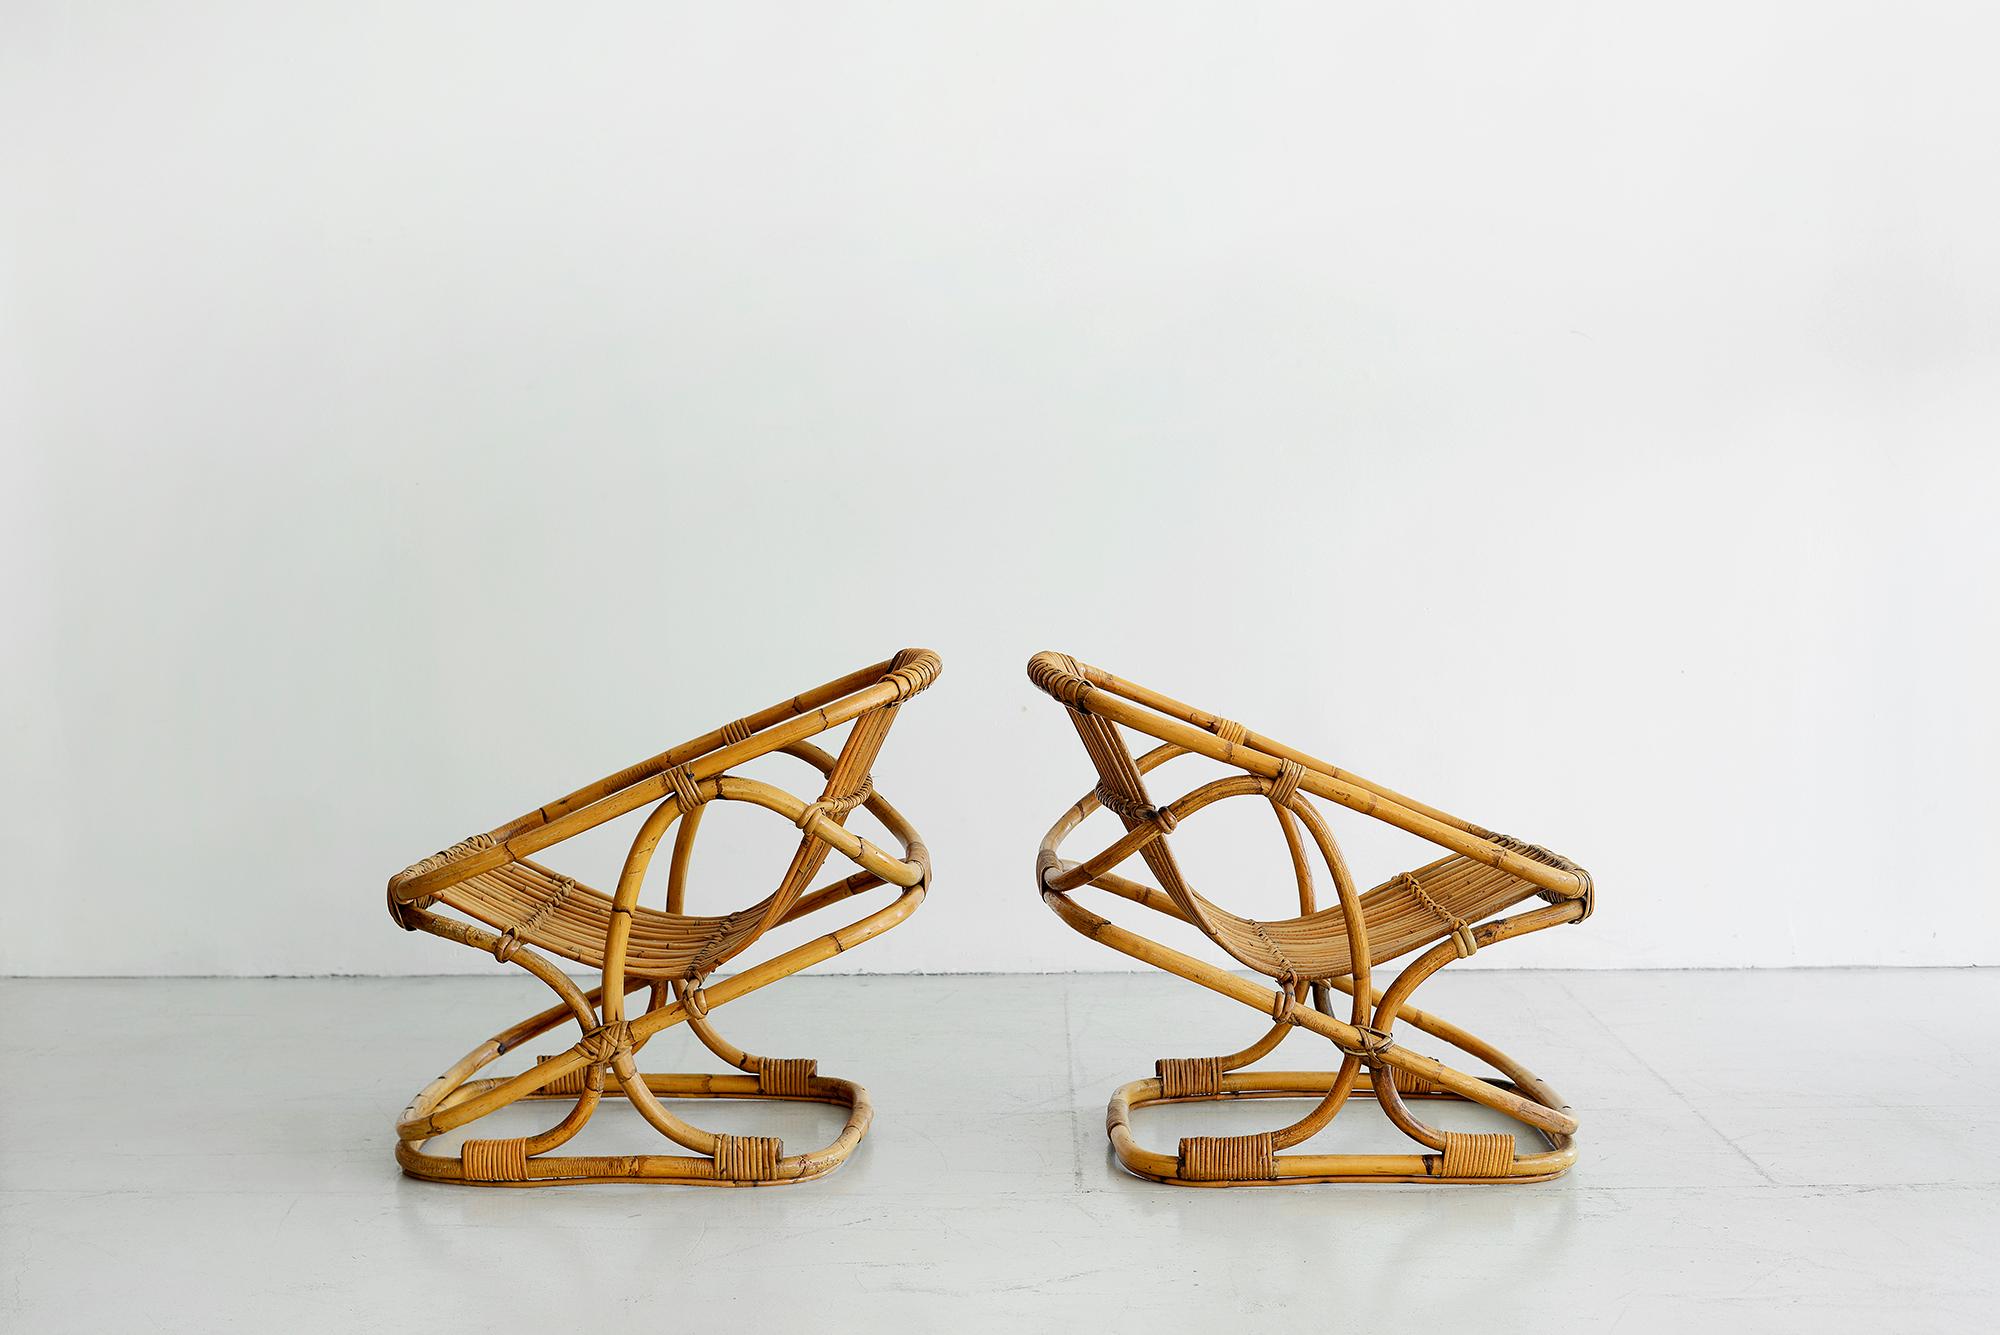 Italian rattan chairs by Bonacina with great sculptural shape.
